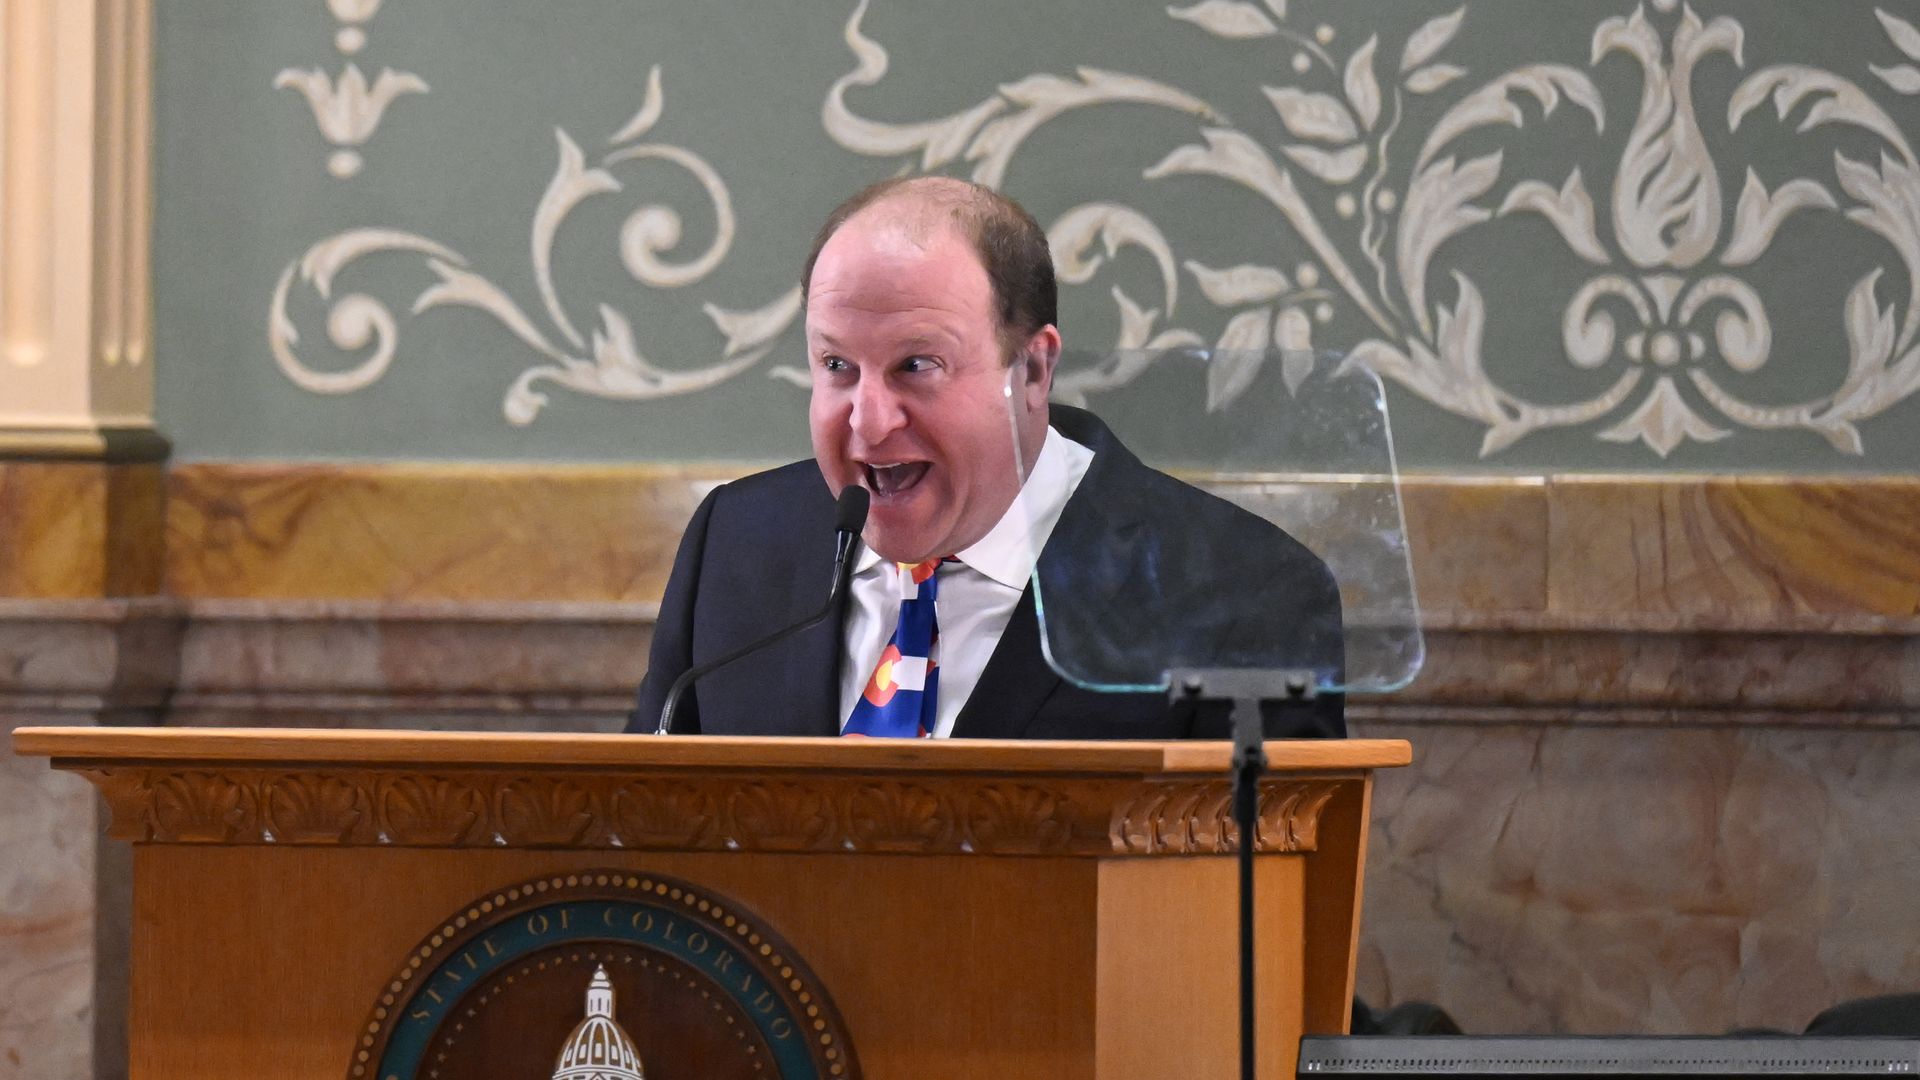 ov. Jared Polis does an impression of Yoda from Star Wars during the 2023 State of the State address Tuesday. Photo: RJ Sangosti/The Denver Post